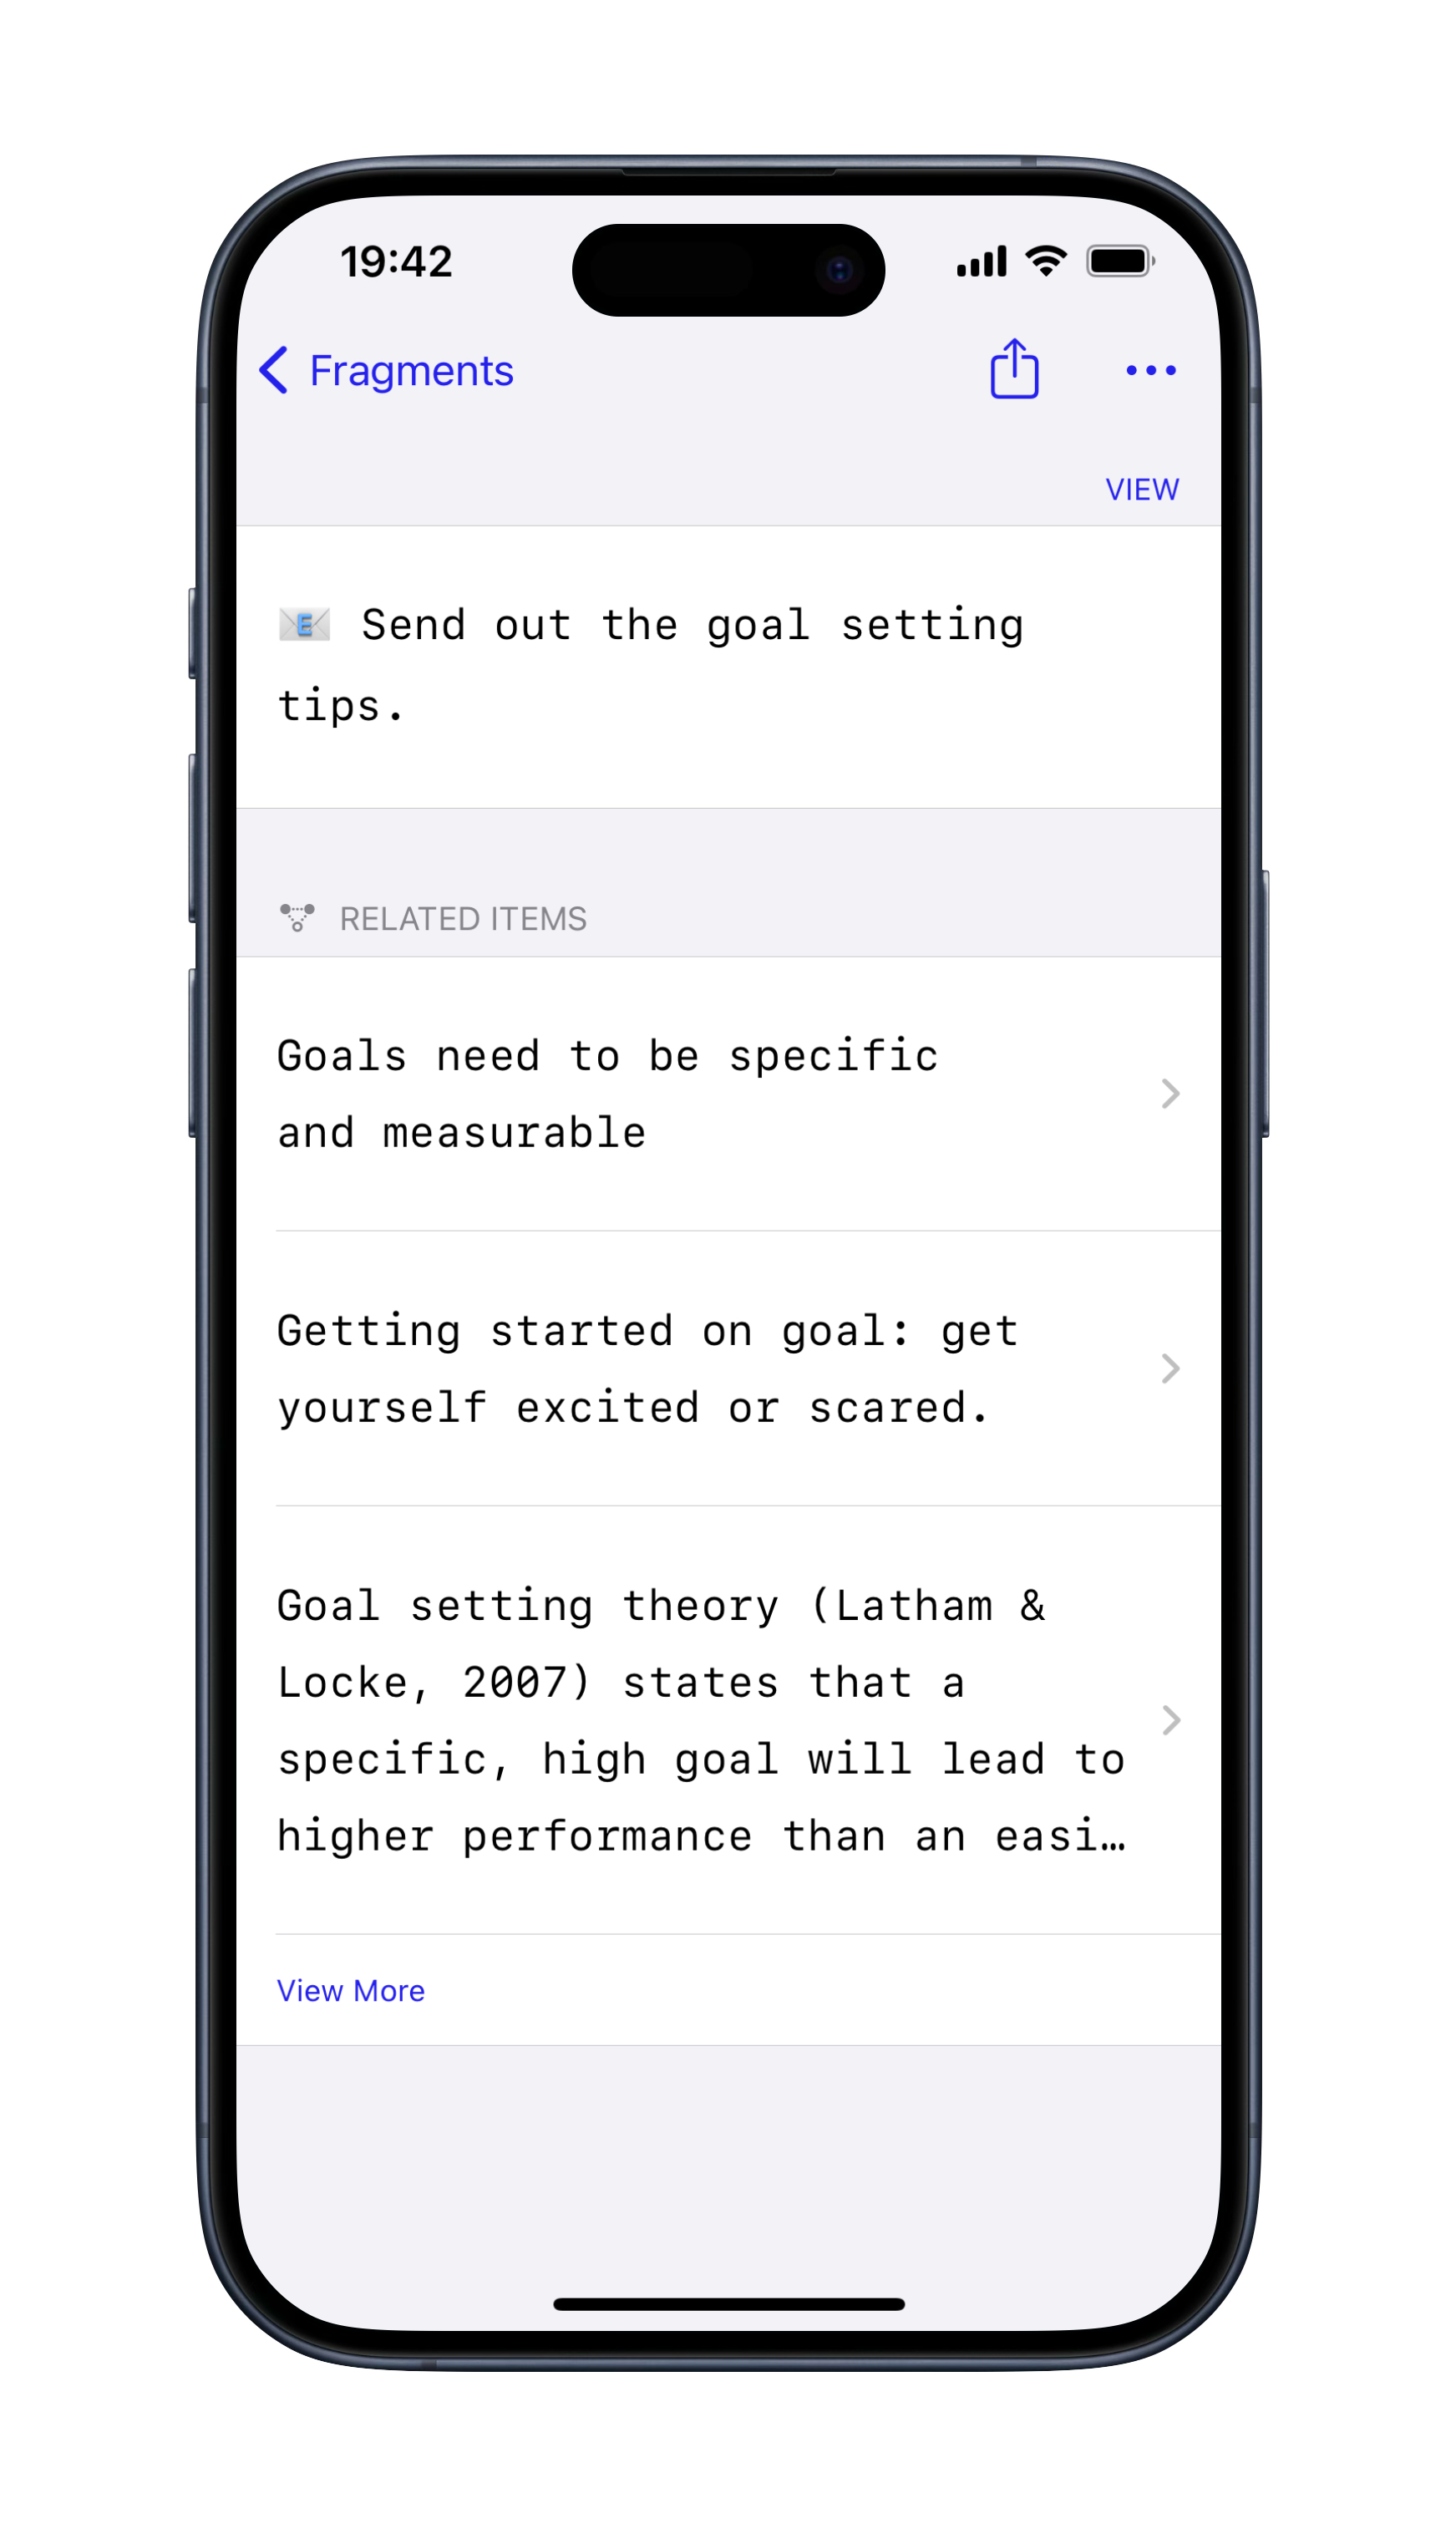 A screenshot of the app showcasing related notes. A note 'Send out the goal setting tips' shows on top of other 'Related Items' such as 'Goals need to be specific and measurable', 'Getting started on goal: get yourself excited or scared', and 'Goal setting theory (Latham & Locke, 2007) states that a specific, high goal will lead to higher performance than an easi...'